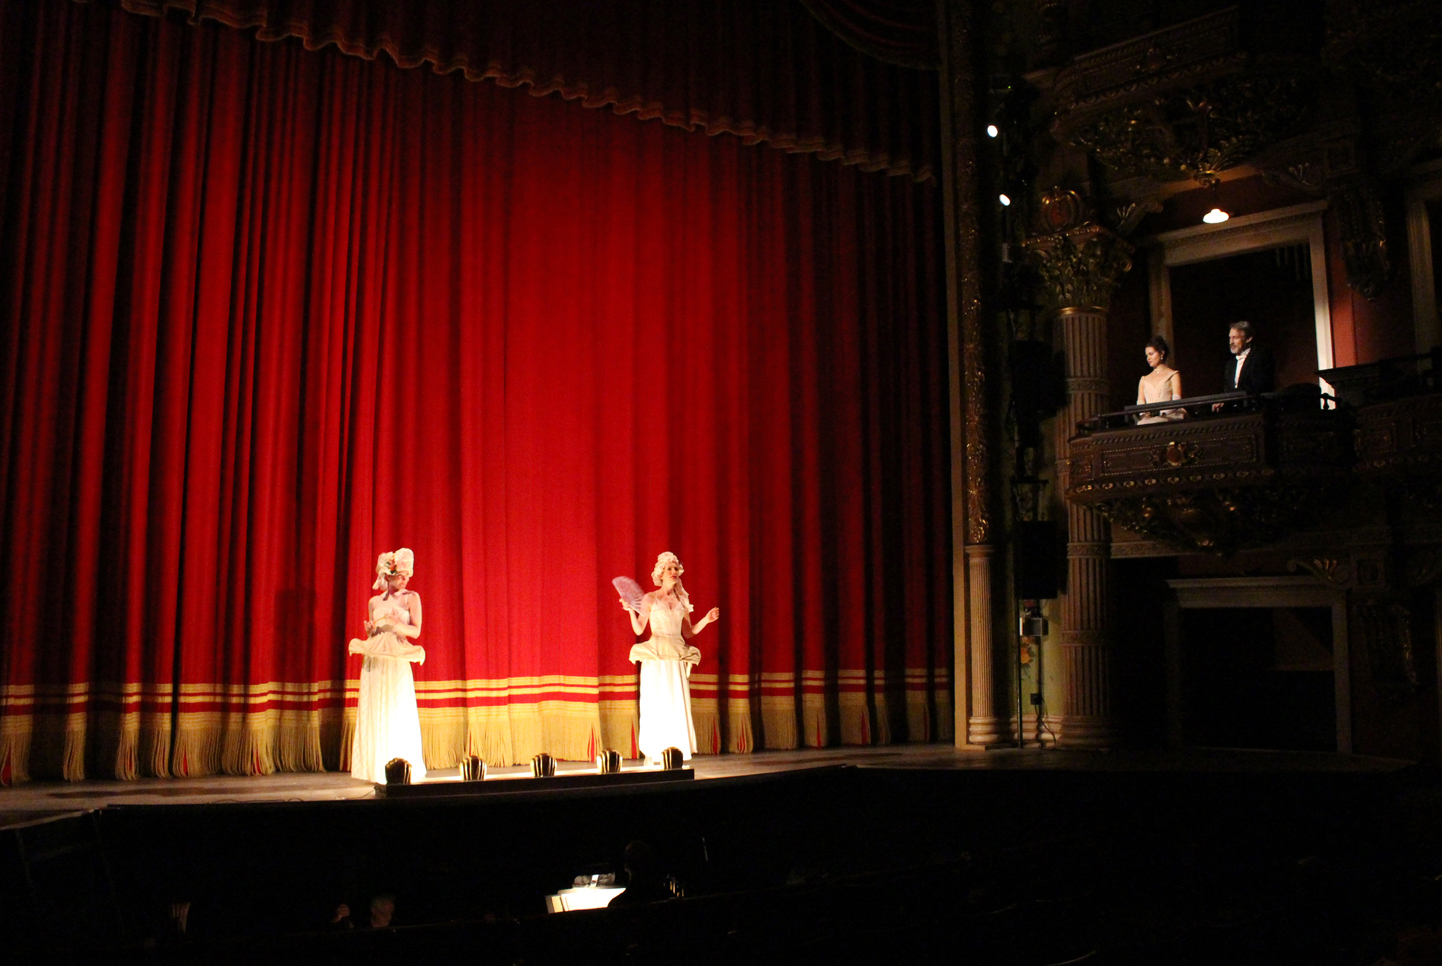 Theater scene - we used the glorious boxes in the house and played in front of the red curtain